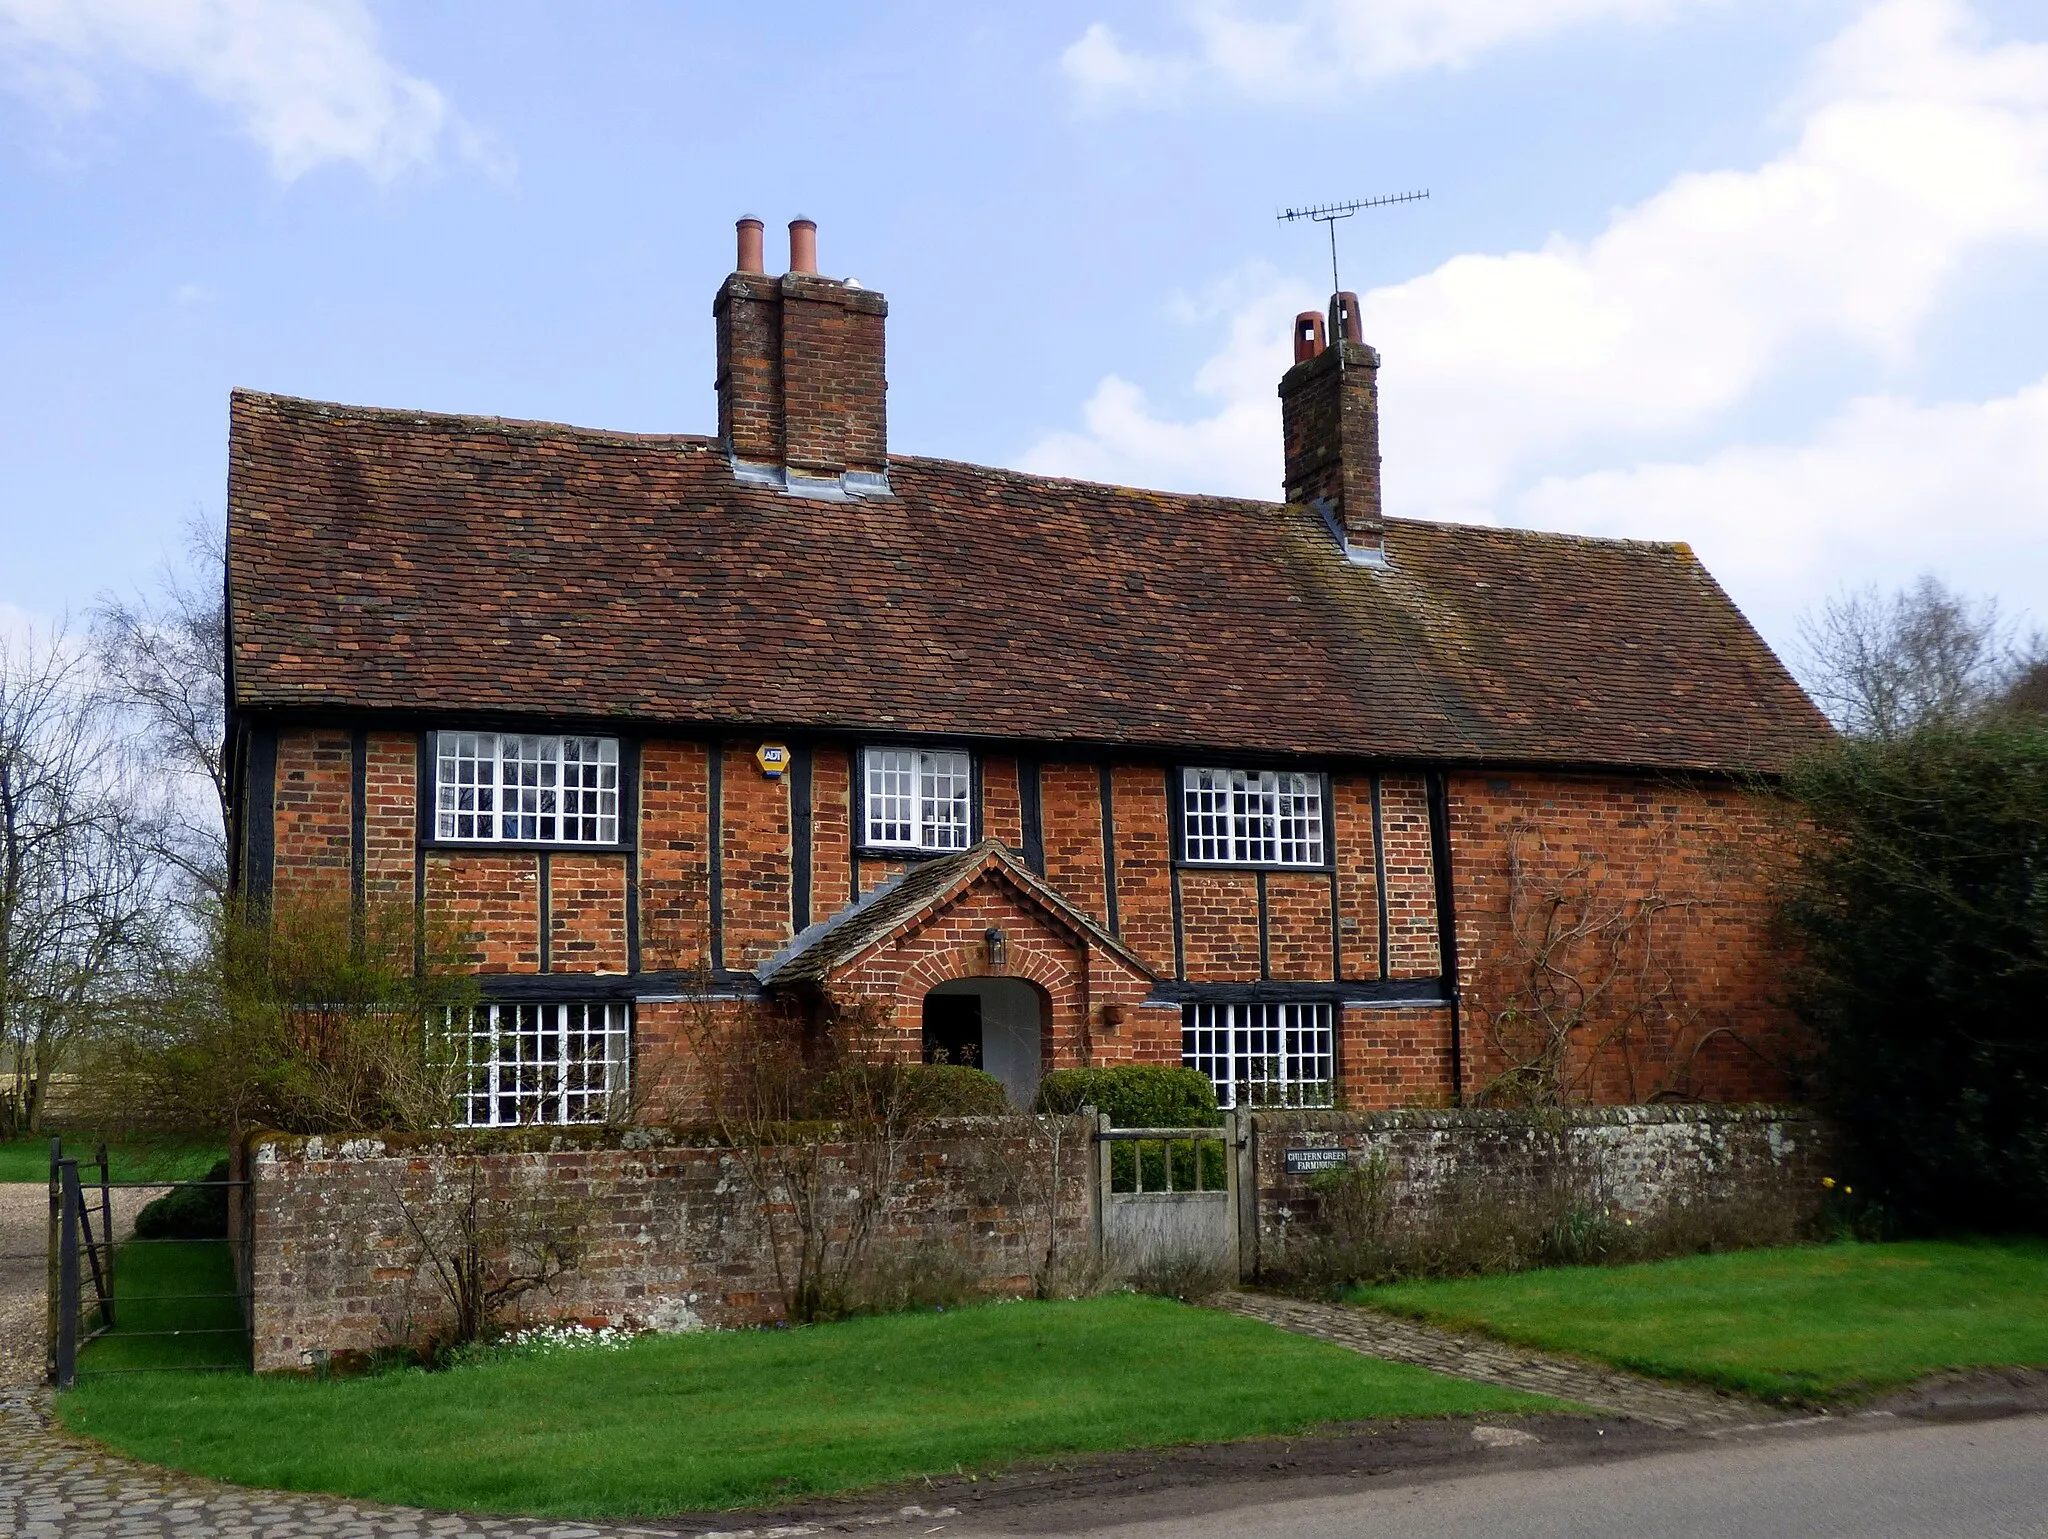 Photo showing: Chiltern Green Farmhouse, Chiltern Green, Hyde, Bedfordshire (Grade II). Early-17th century farmhouse.

GOC Hertfordshire's walk on 14 April 2018. This was a 9.8-mile circular walk in and around the villages and hamlets of Breachwood Green, Colemans Green, Darleyhall and Wandon End in Hertfordshire; Someries and Chiltern Green in Bedfordshire; and Peter's Green, Perry Green and Bendish, back in Hertfordshire. I led the walk, which was attended by 13 people (including me). You can view my other photos of this event, find out more about the Gay Outdoor Club or see my collections.